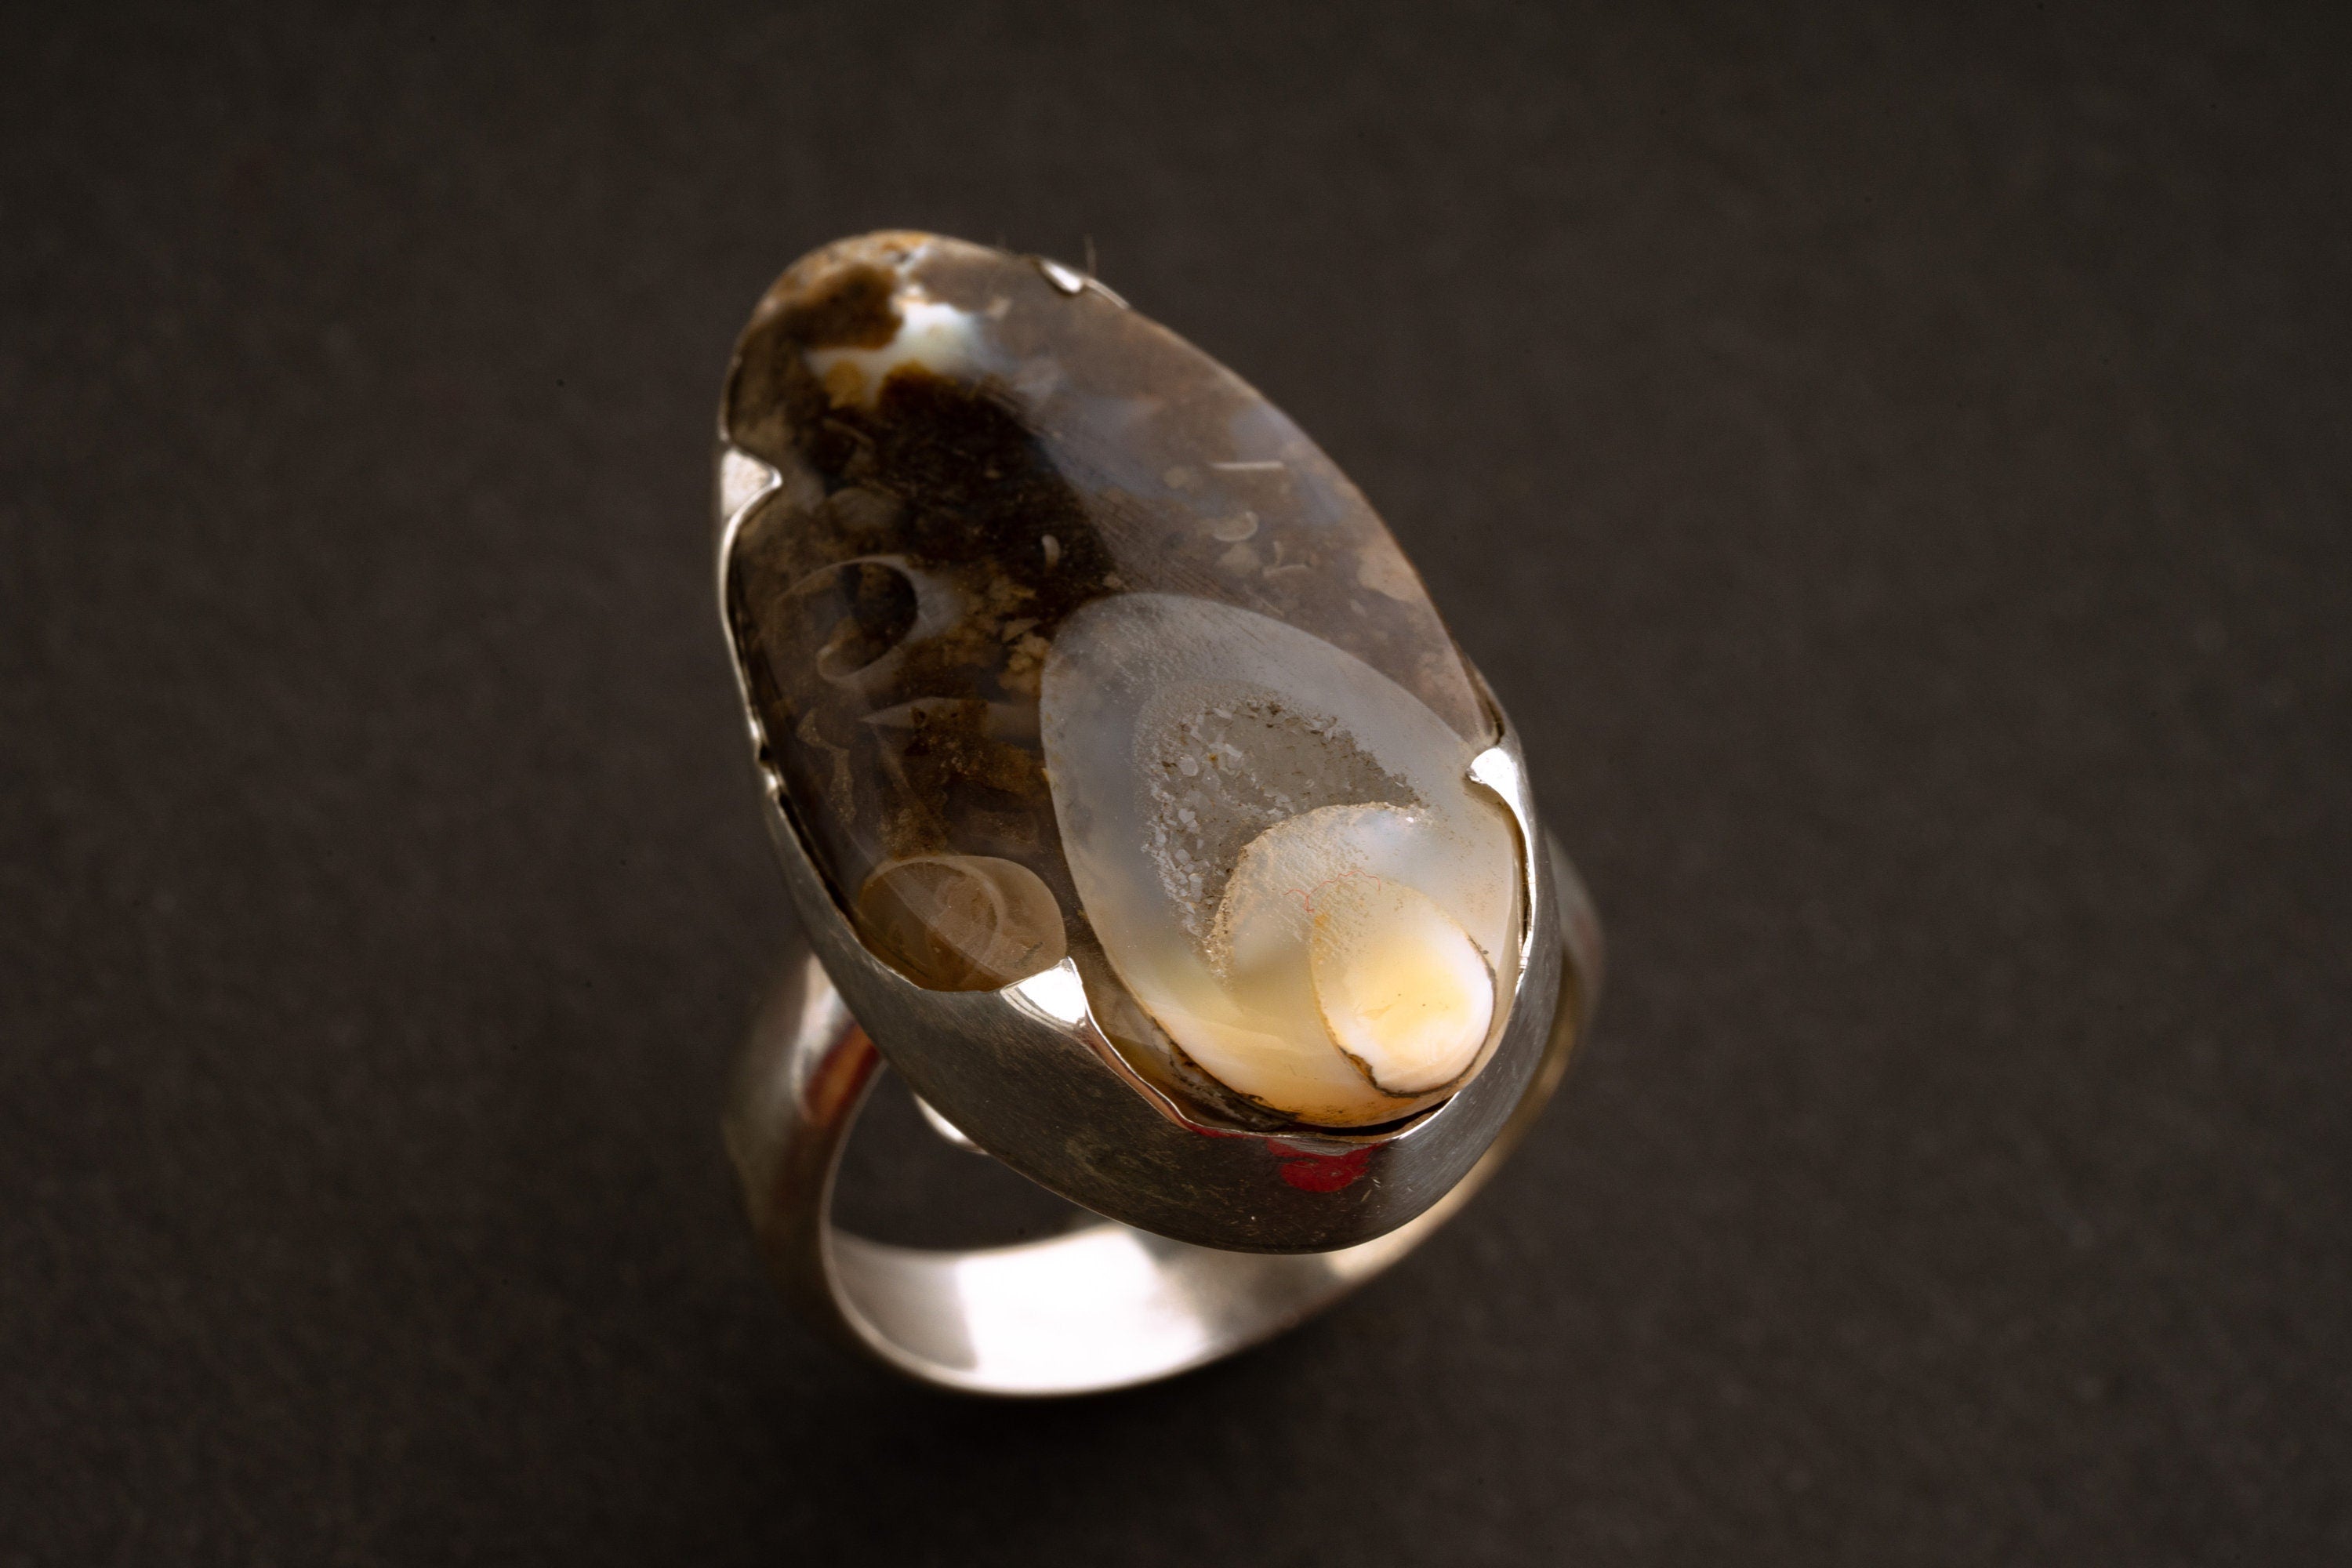 Ancient Crystalized Shell - Unisex - Size 5-12 US - Large Adjustable Sterling Silver Ring